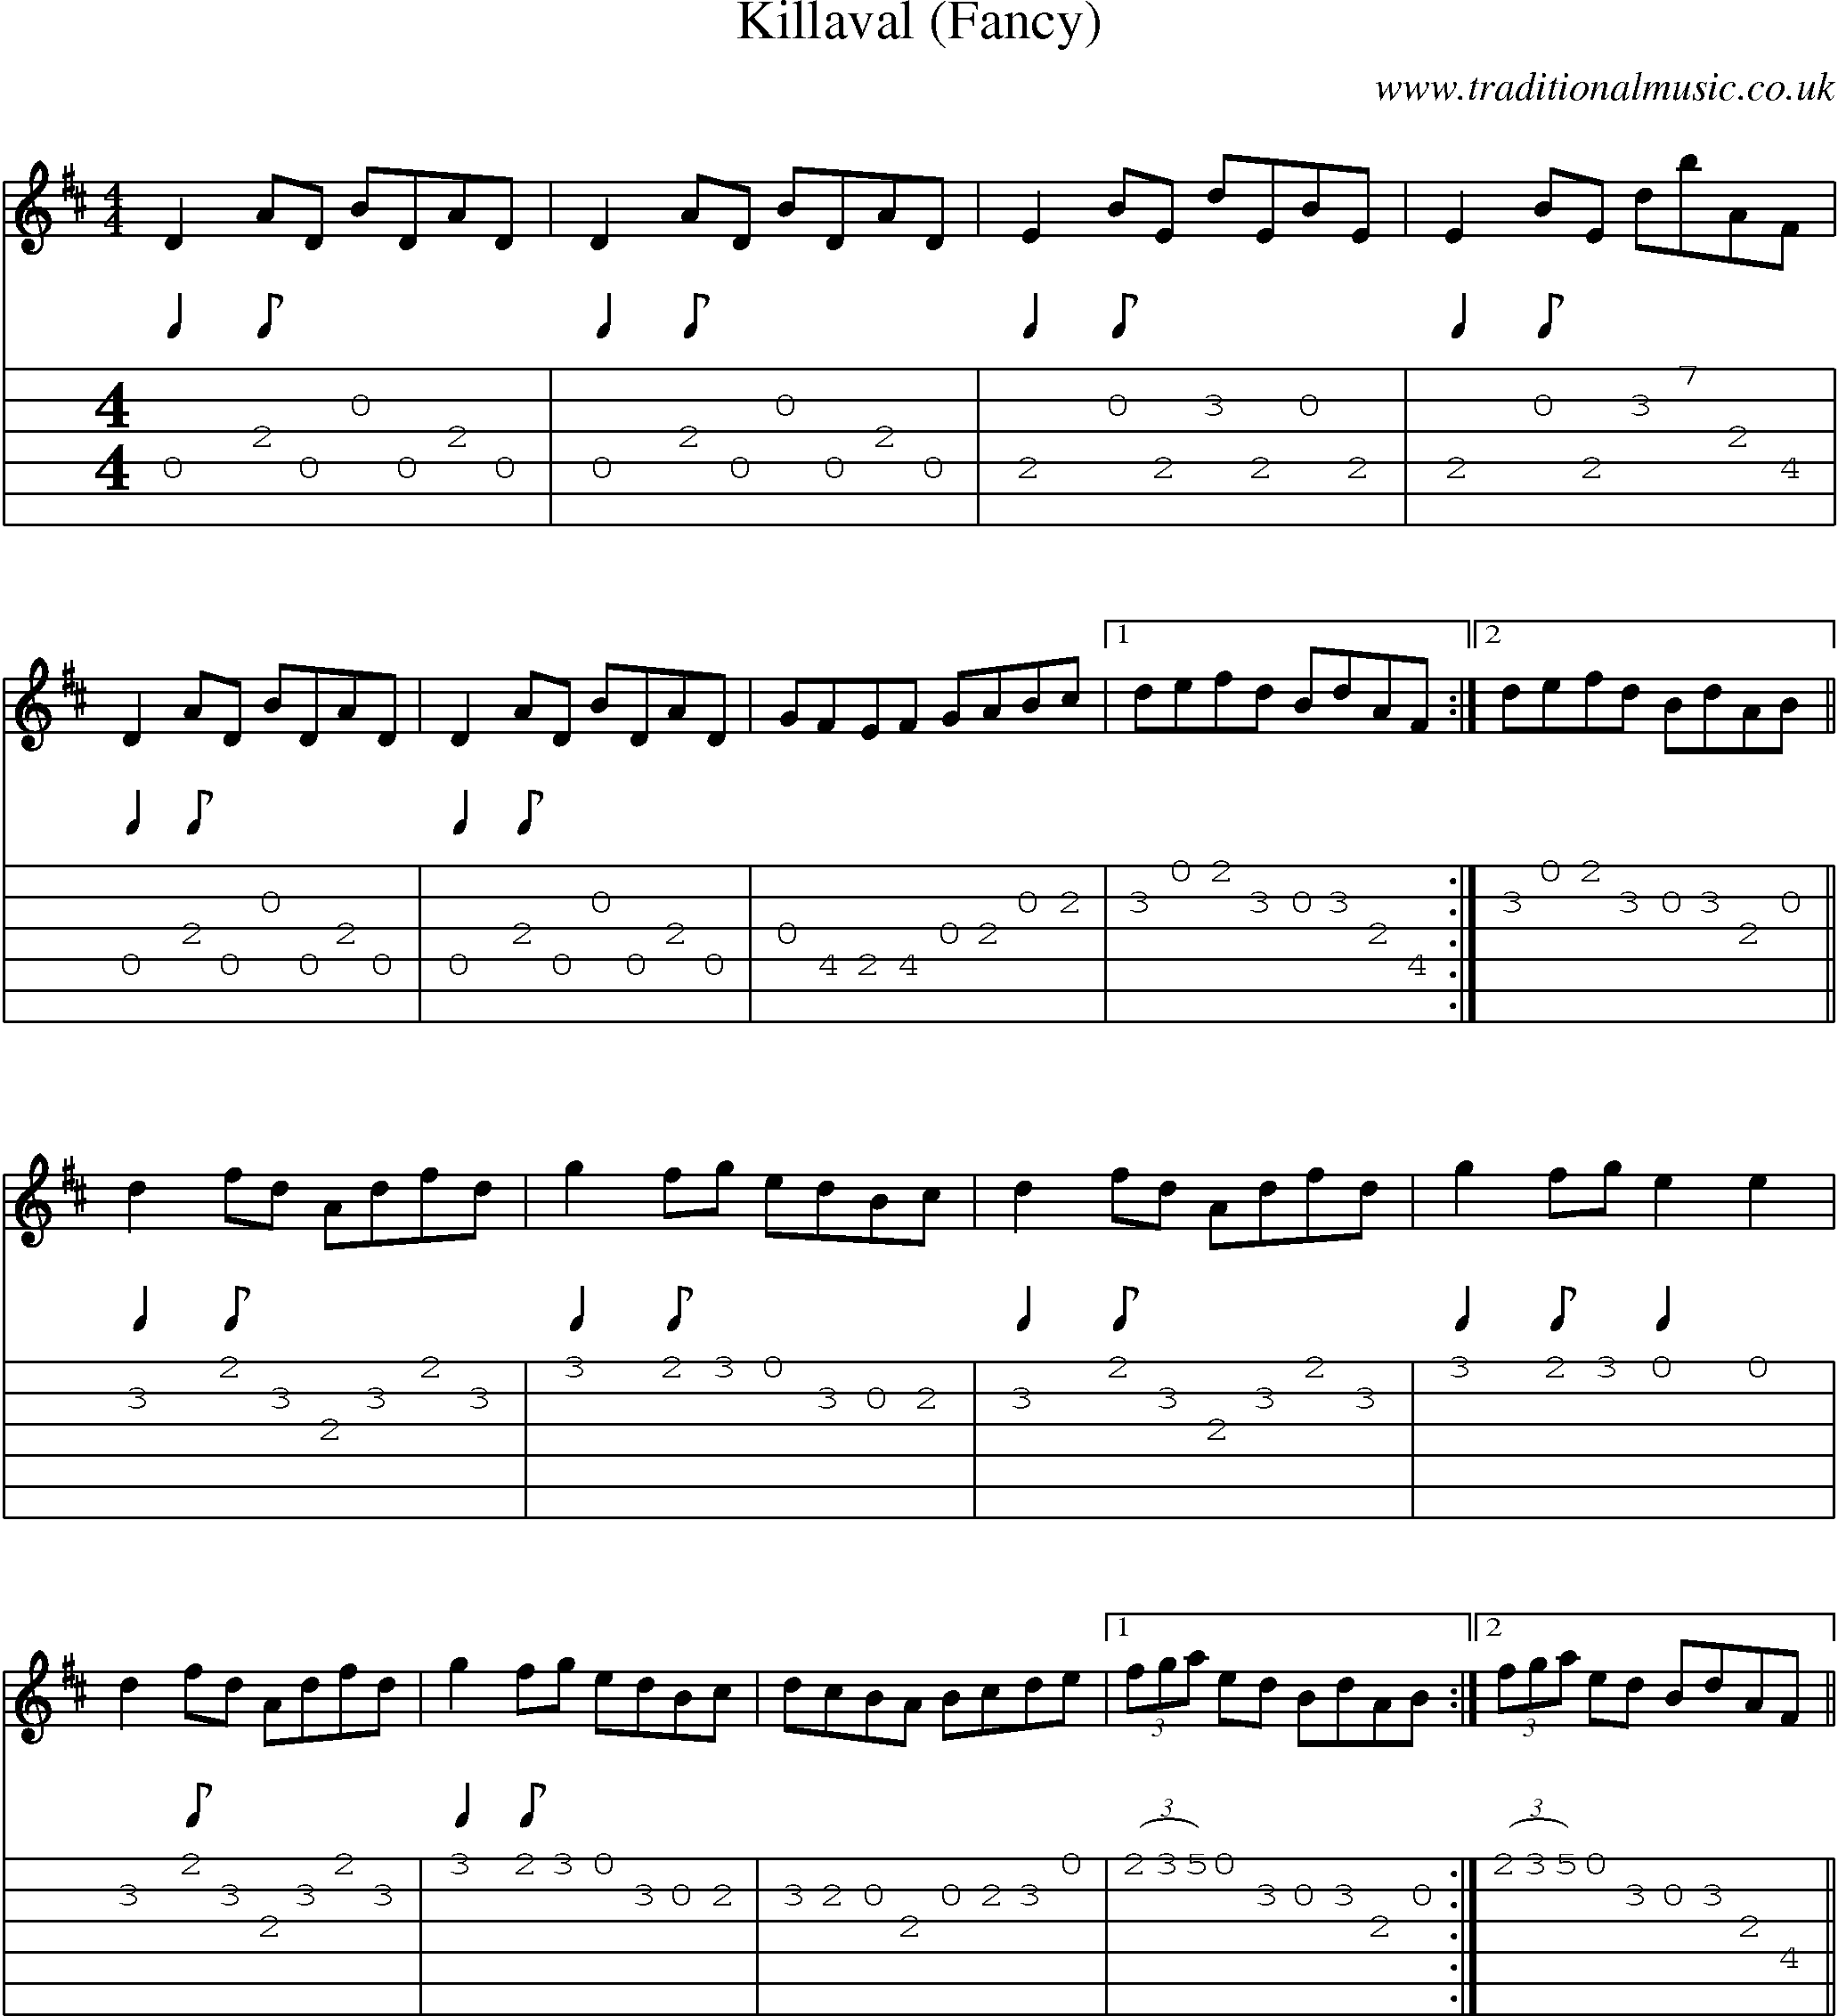 Music Score and Guitar Tabs for Killaval (fancy)